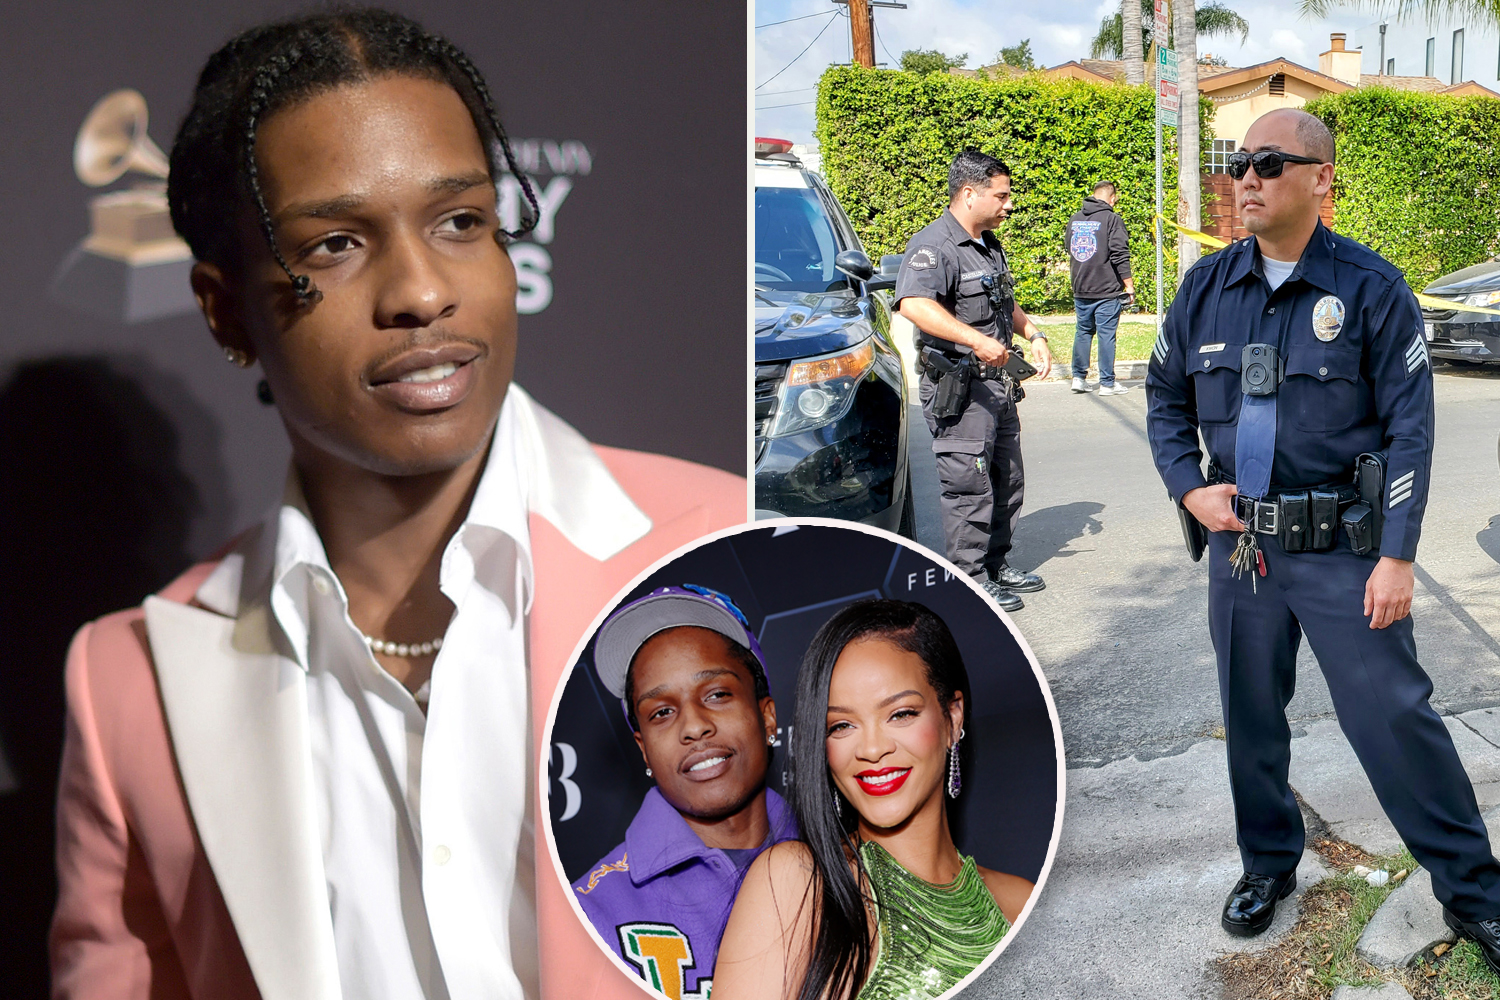 pregnant-rihannas-boyfriend-decides-to-move-out-of-house-raided-by-police